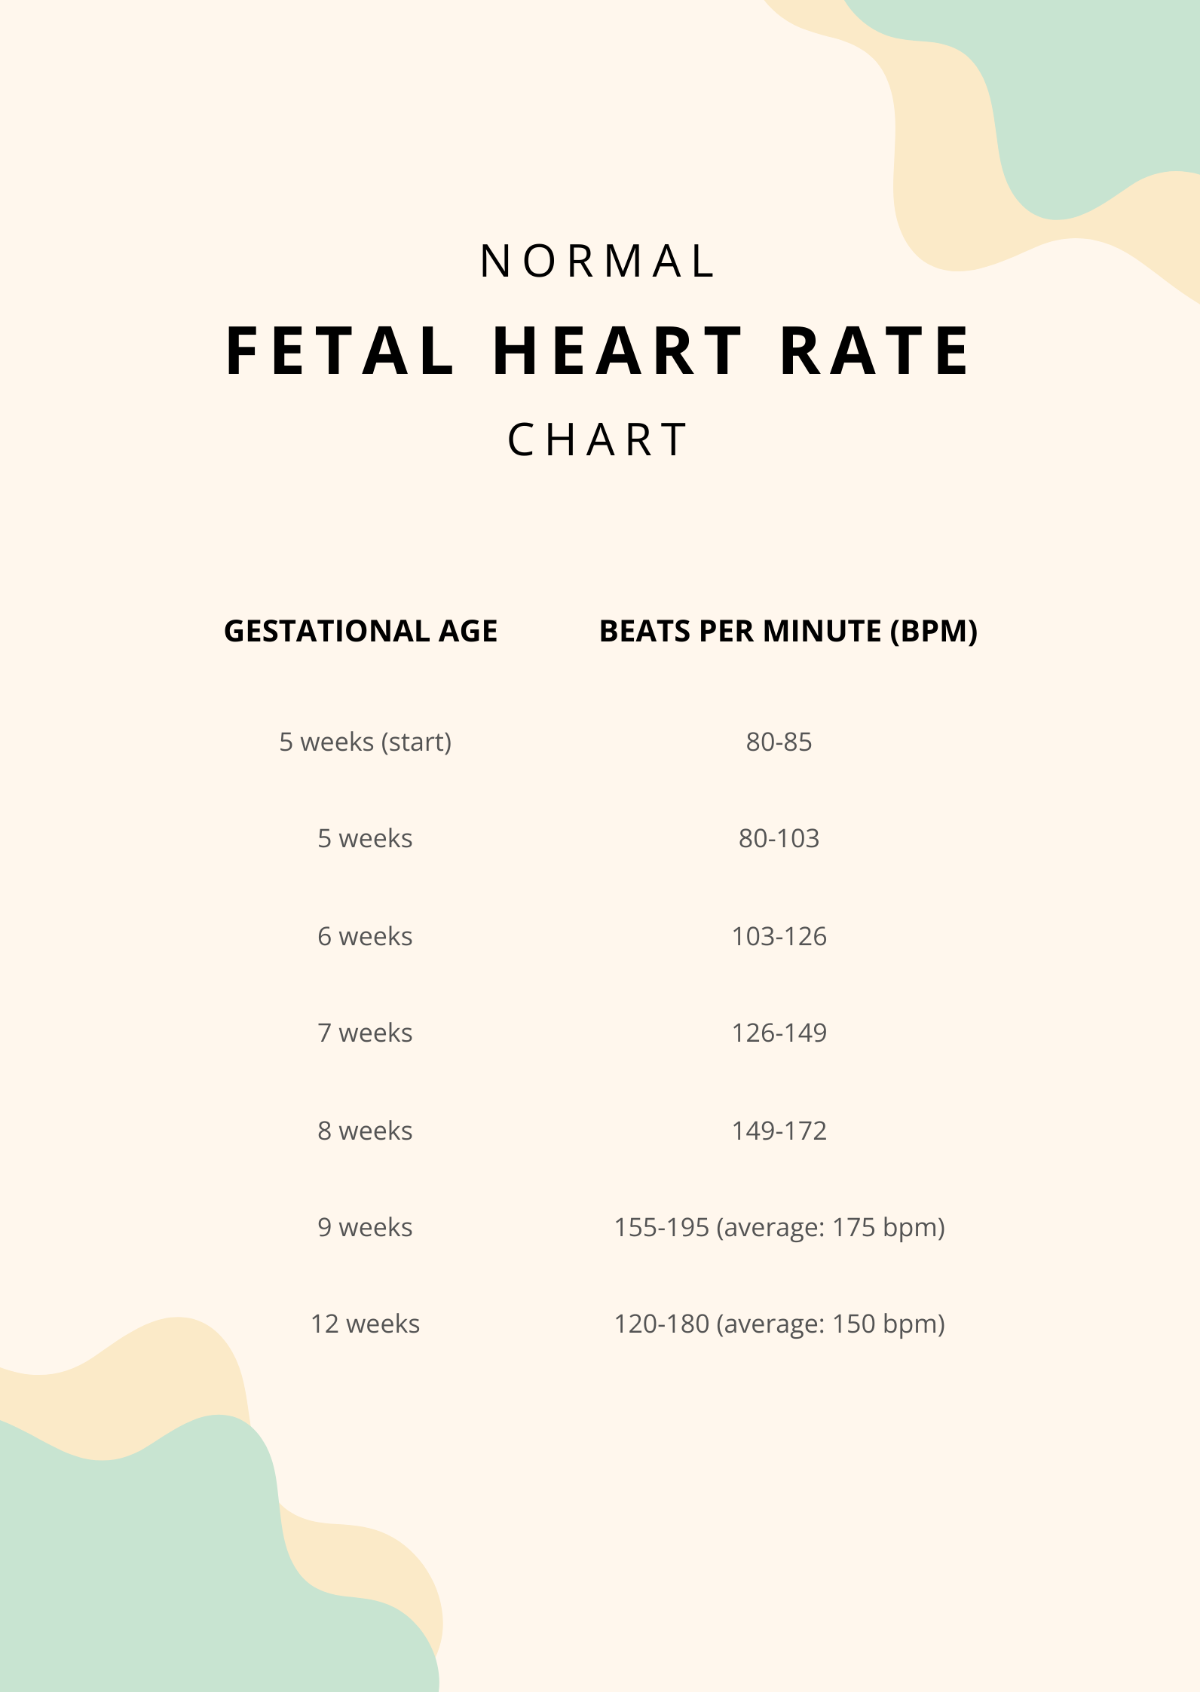 Normal Fetal Heart Rate Chart Template